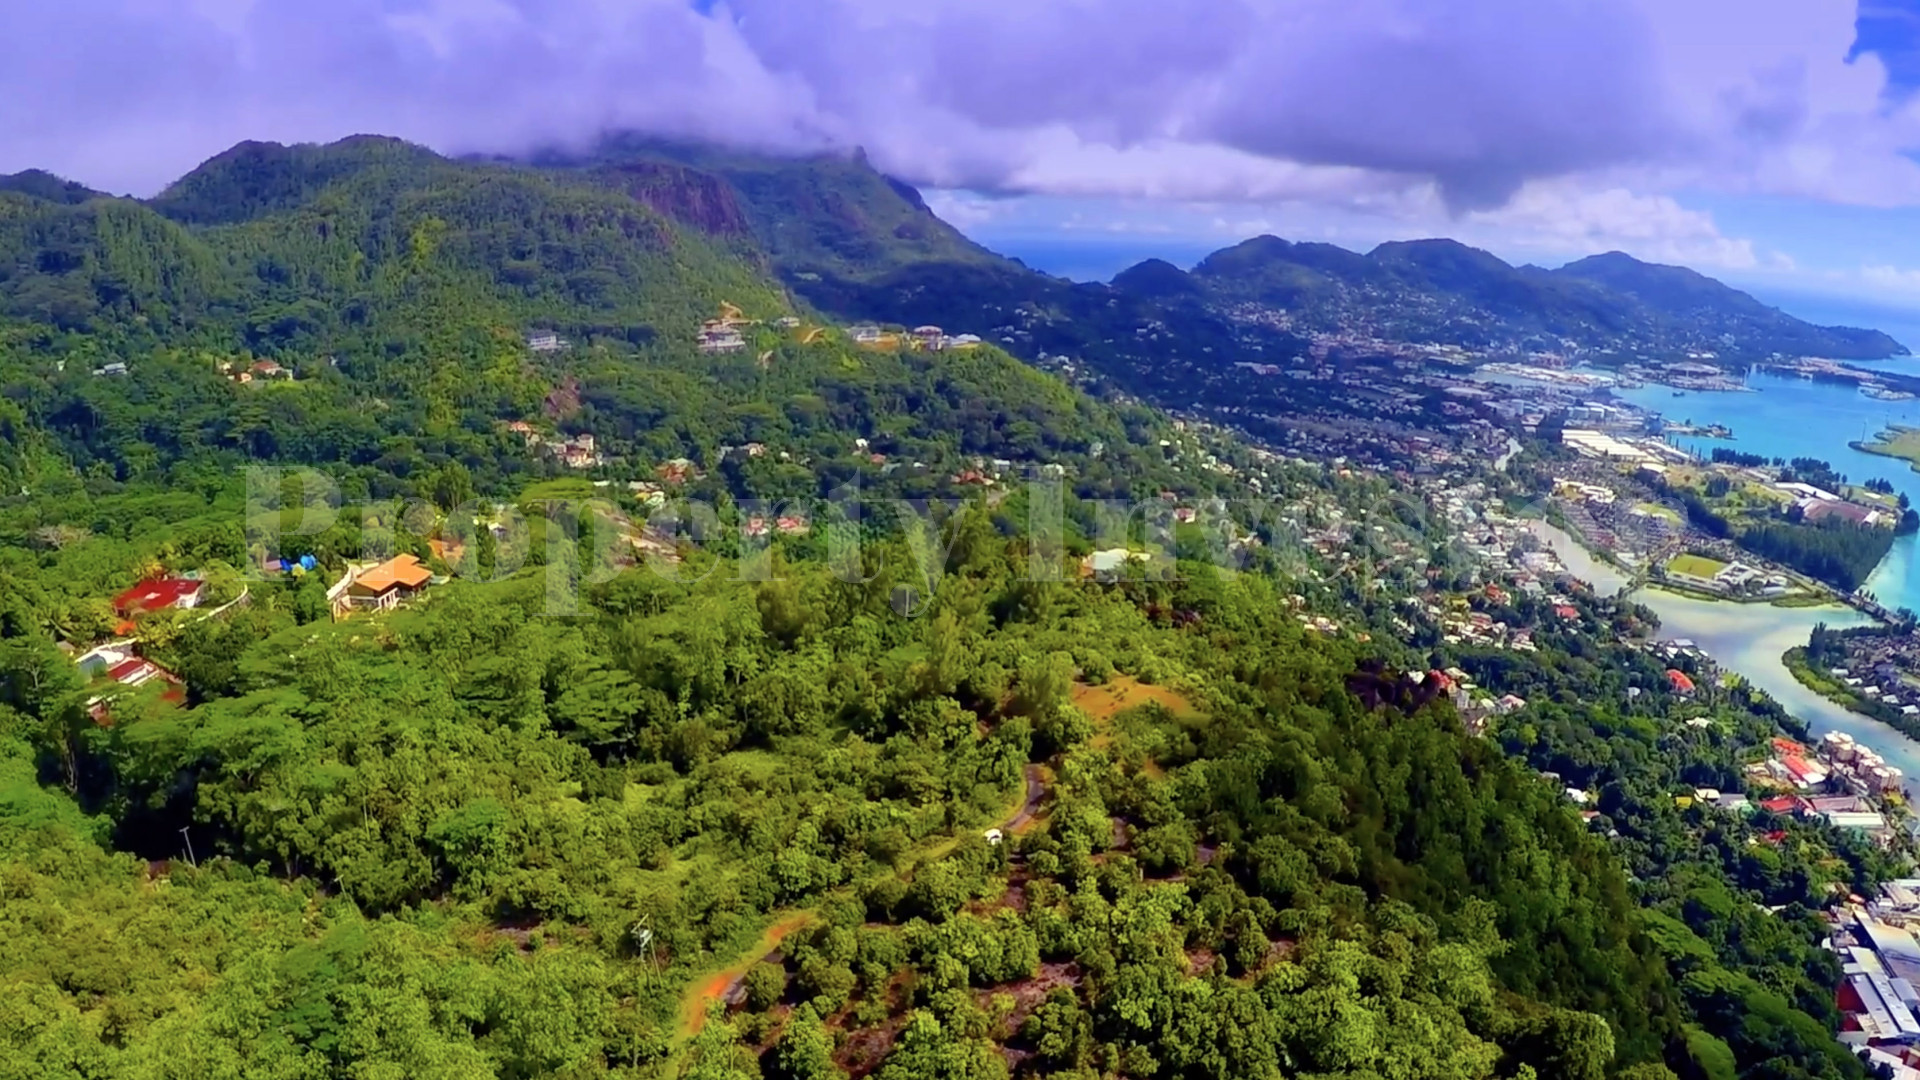 5.46 Hectare Mountaintop Land for Private or Residential Development with Unbeatable 360° Sea & Mountain Views for Sale in Mahé, Seychelles